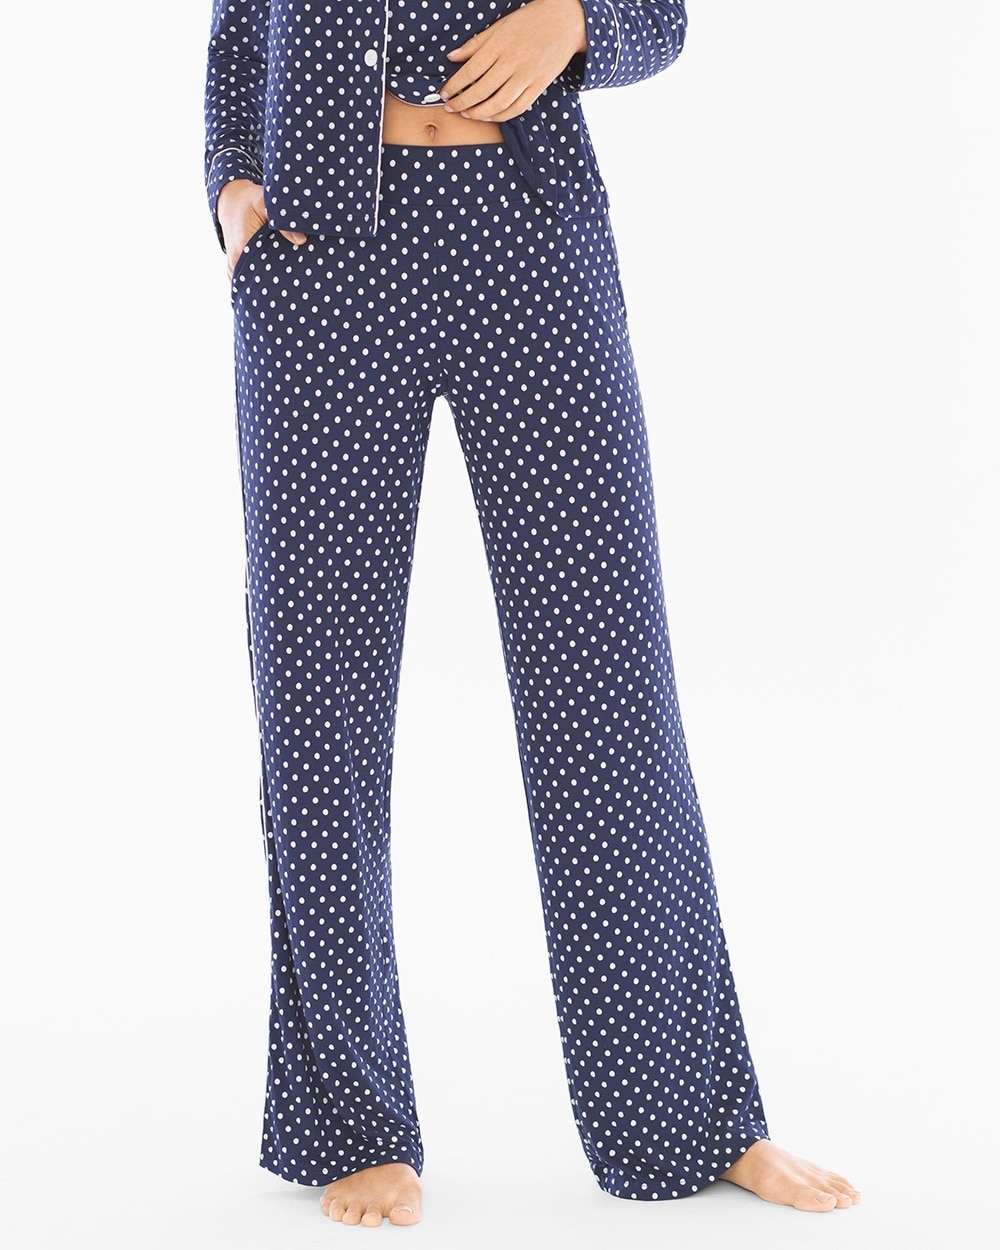 Cool Nights Contrast Piped Pajama Pants Delightful Dot Navy